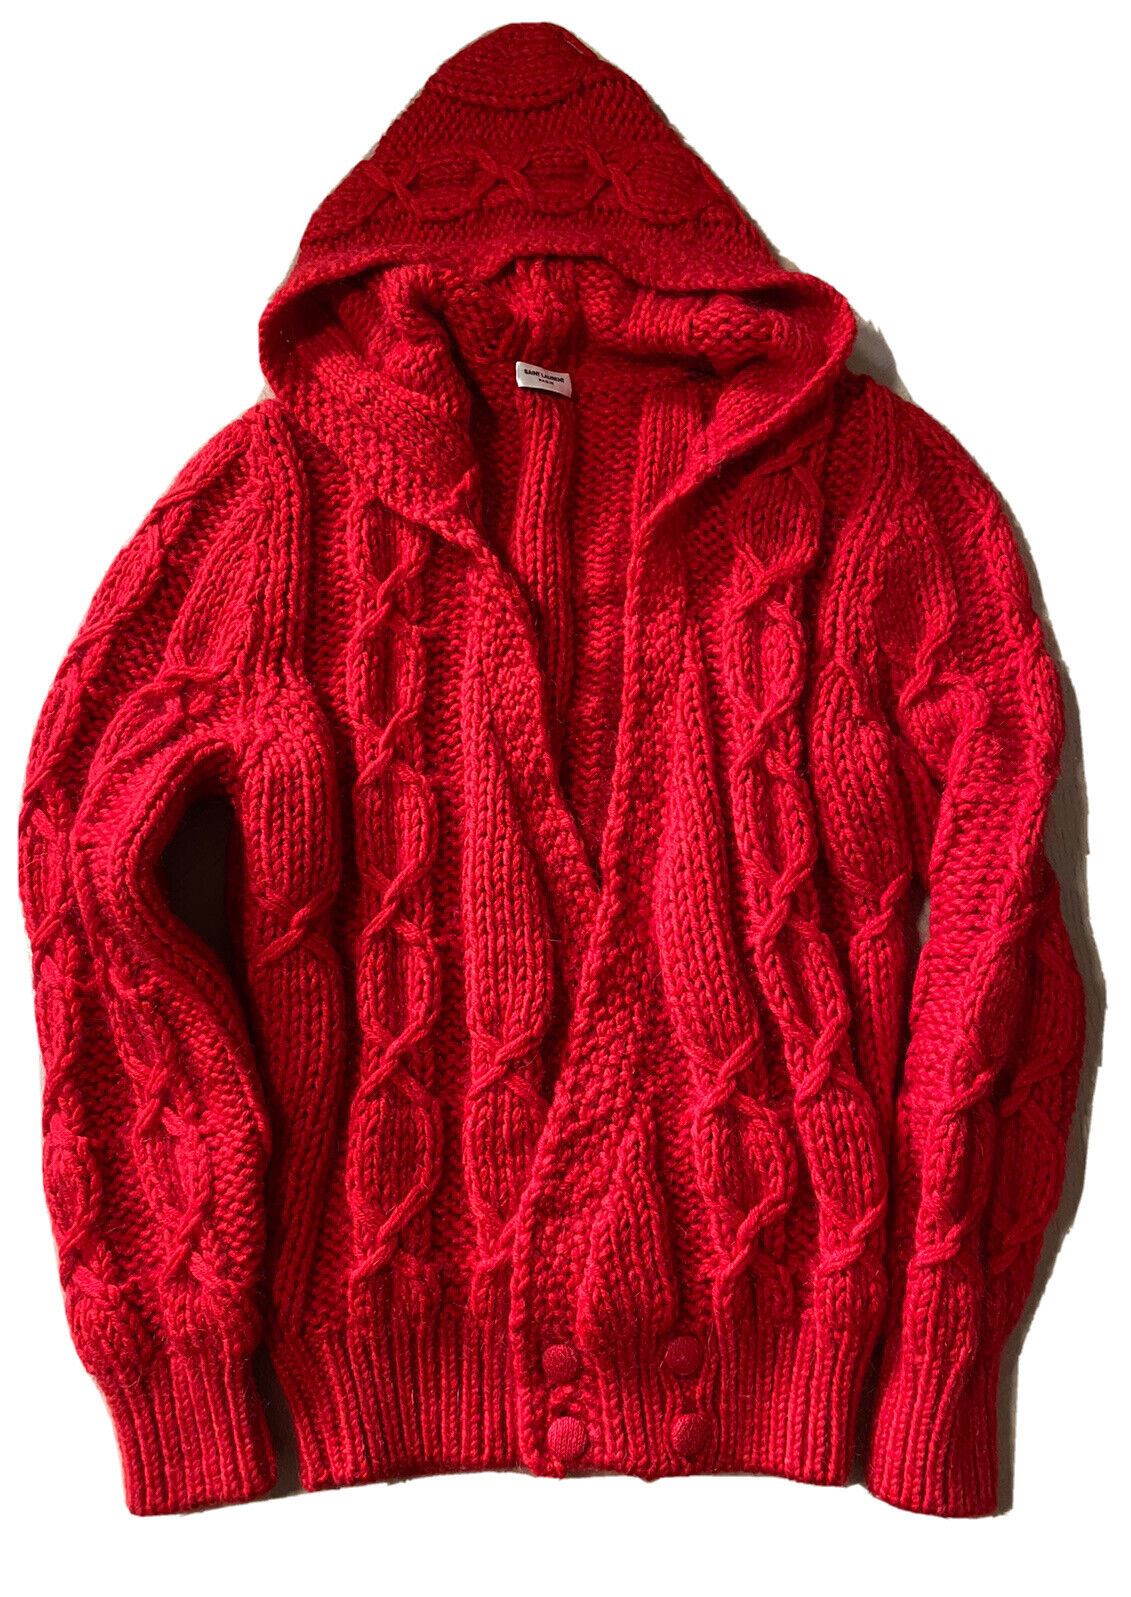 NWT $1190 Saint Laurent Men Coble-Knit Hooded Cardigan Sweater Red S Italy